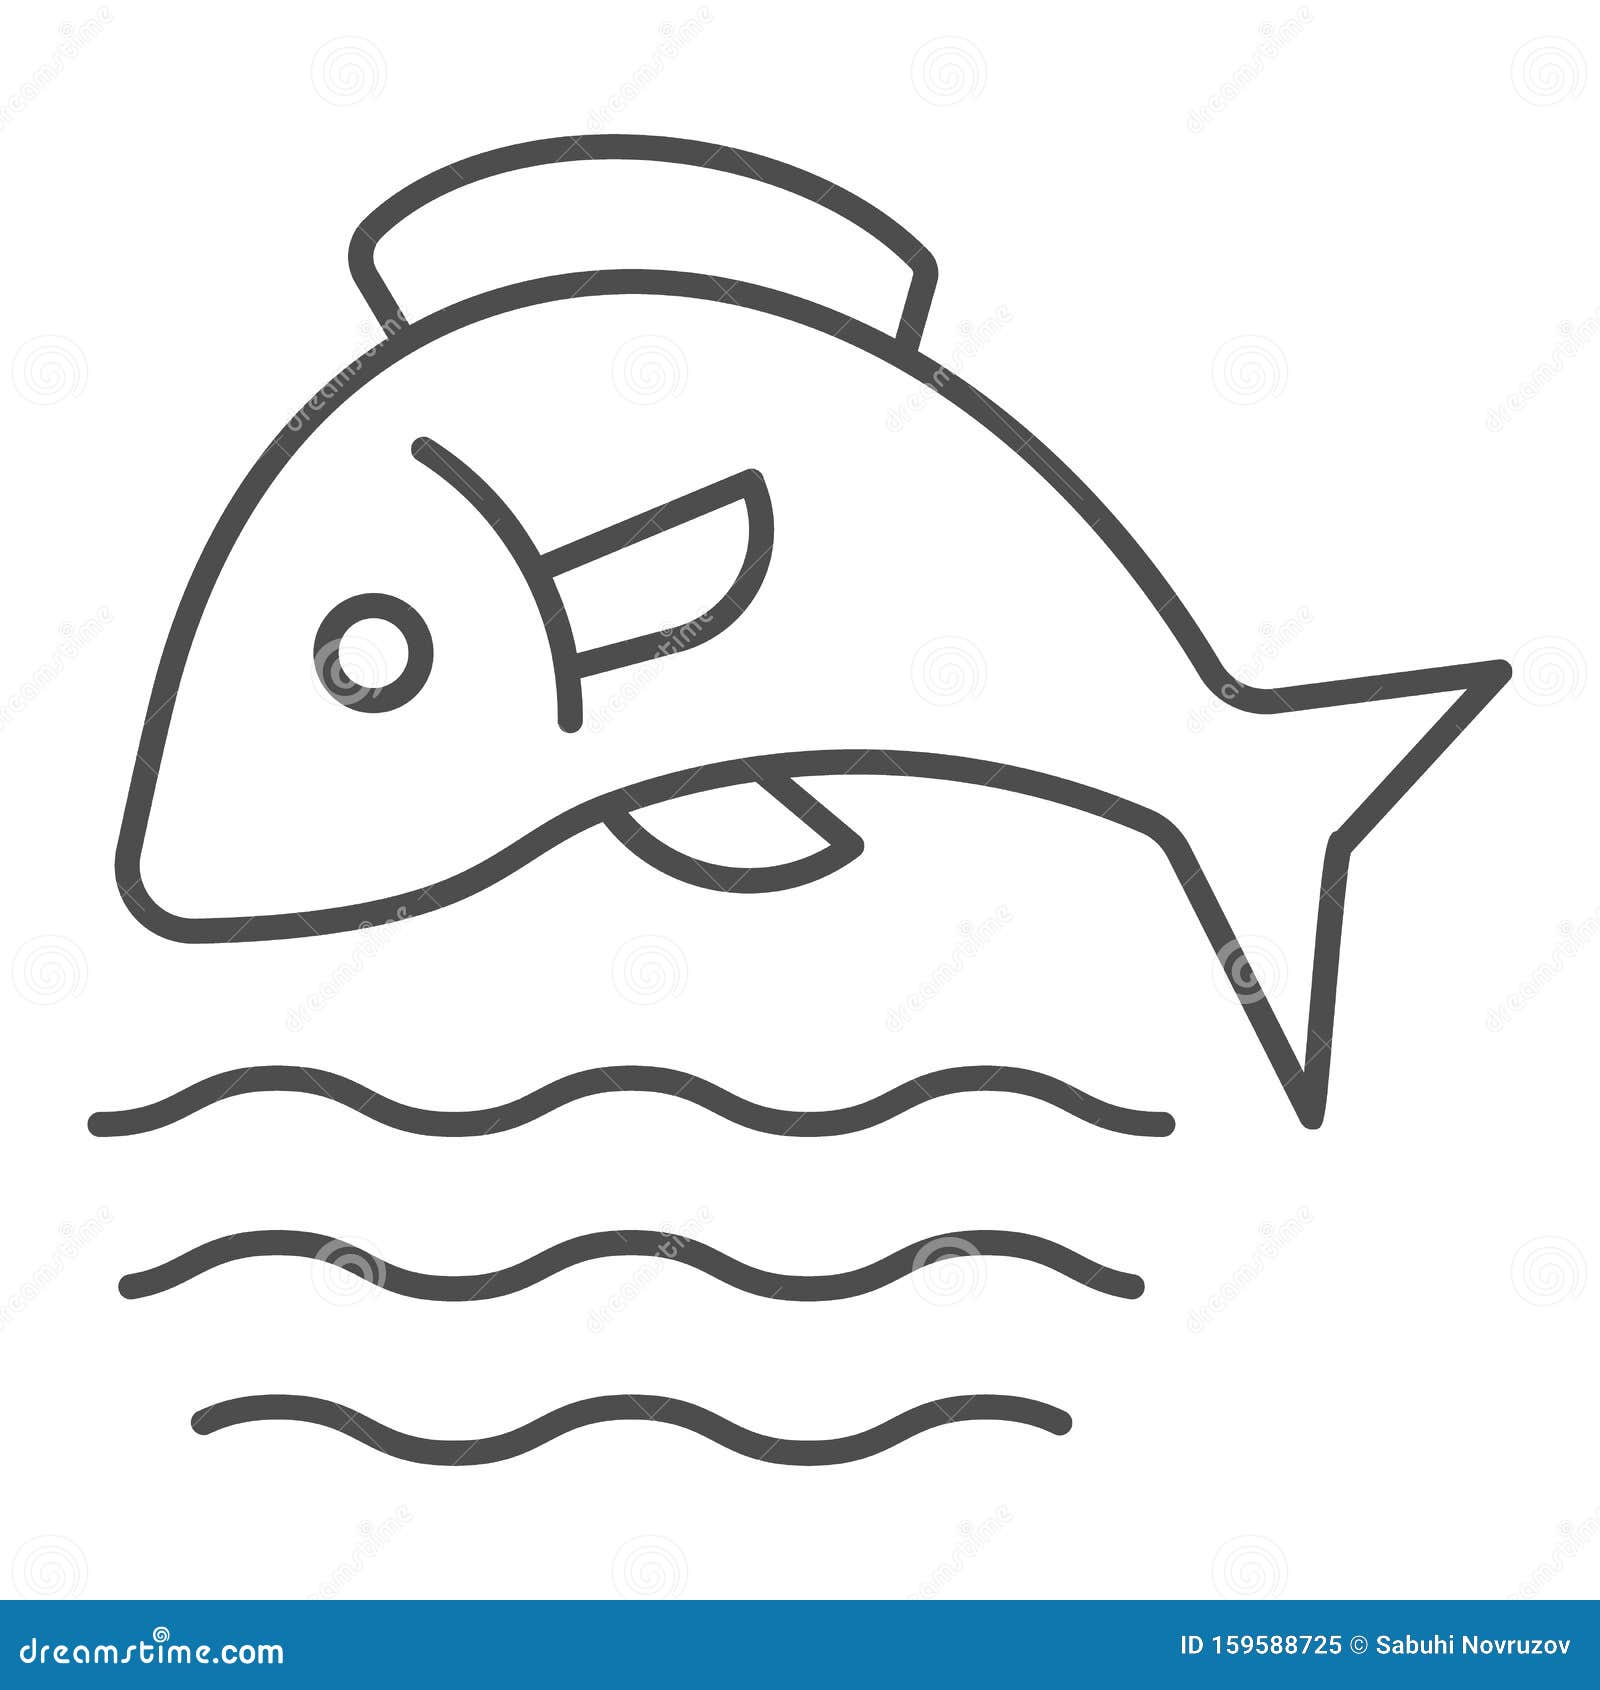 https://thumbs.dreamstime.com/z/fish-water-thin-line-icon-fishing-vector-illustration-isolated-white-aquatic-animal-outline-style-design-fish-water-thin-159588725.jpg